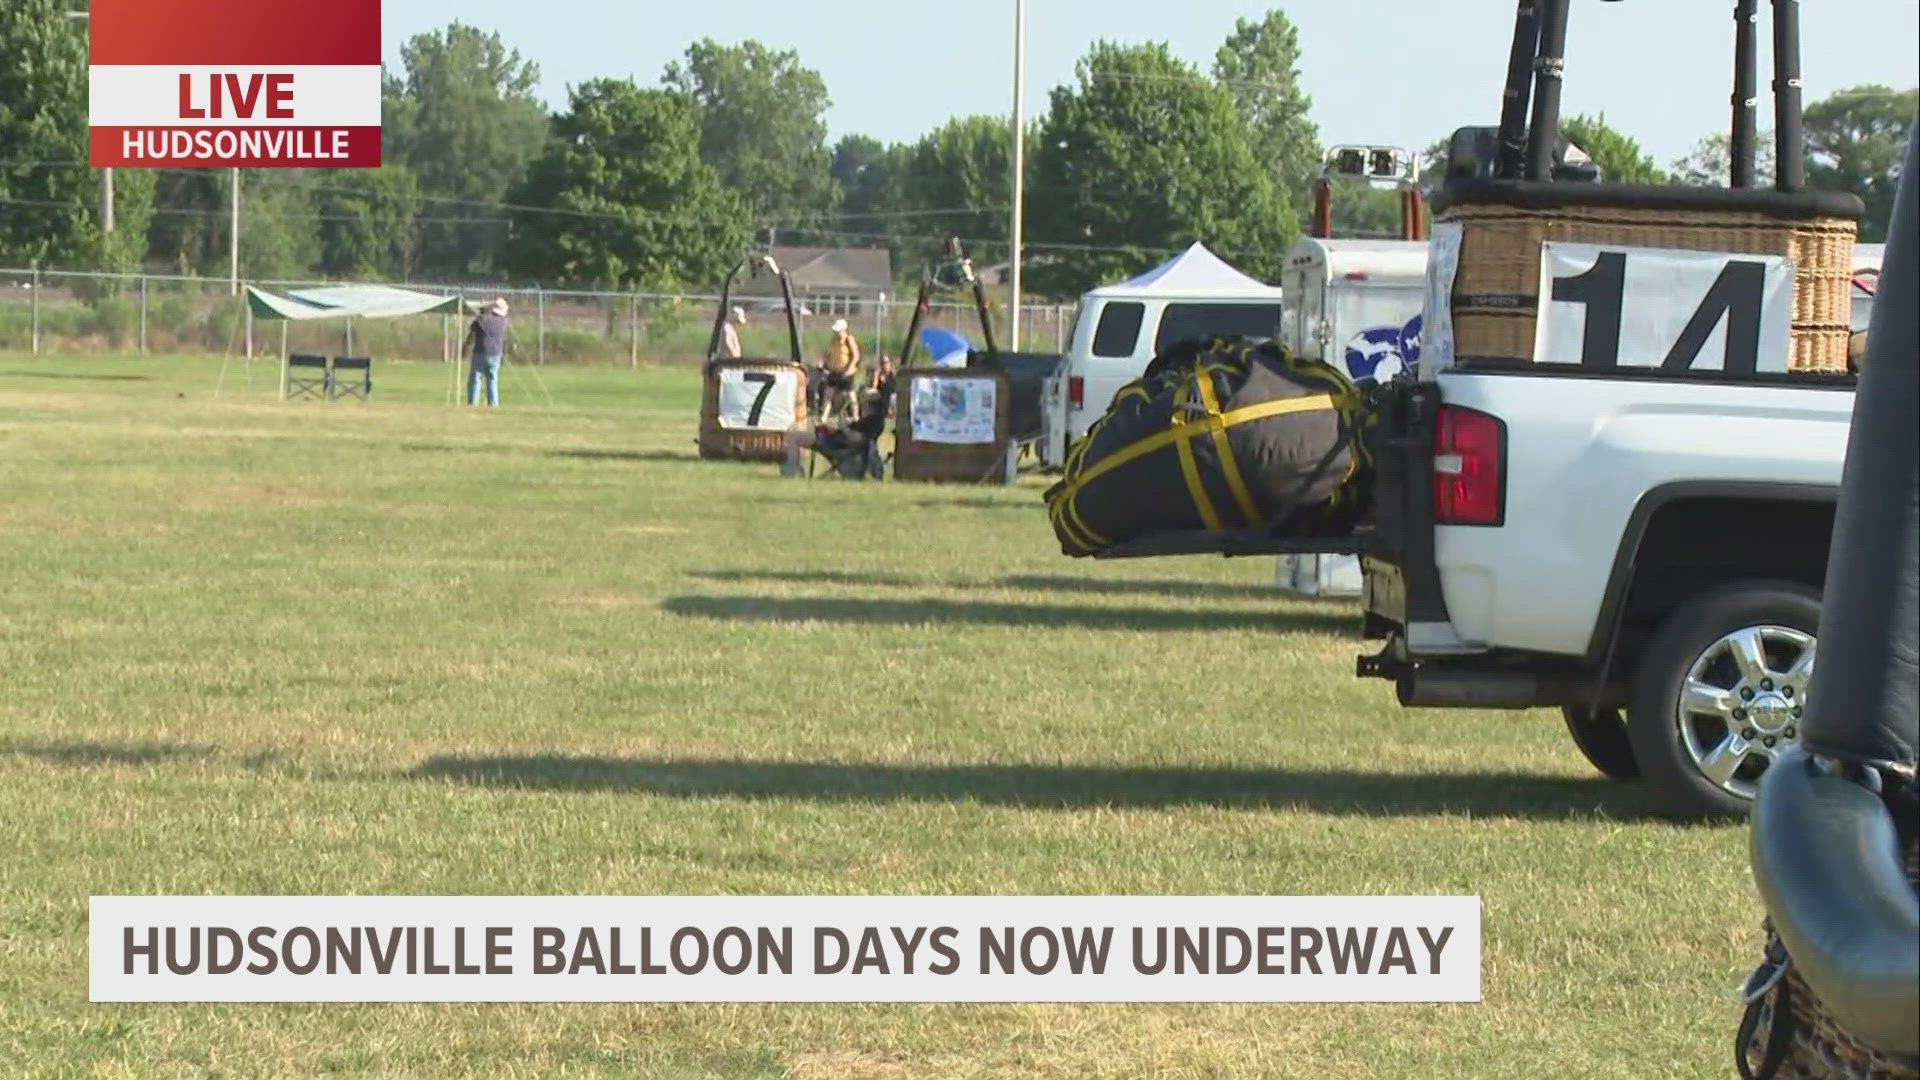 From June 21-23, the Hudsonville Fairgrounds will be bustling with beats, eats and balloons.